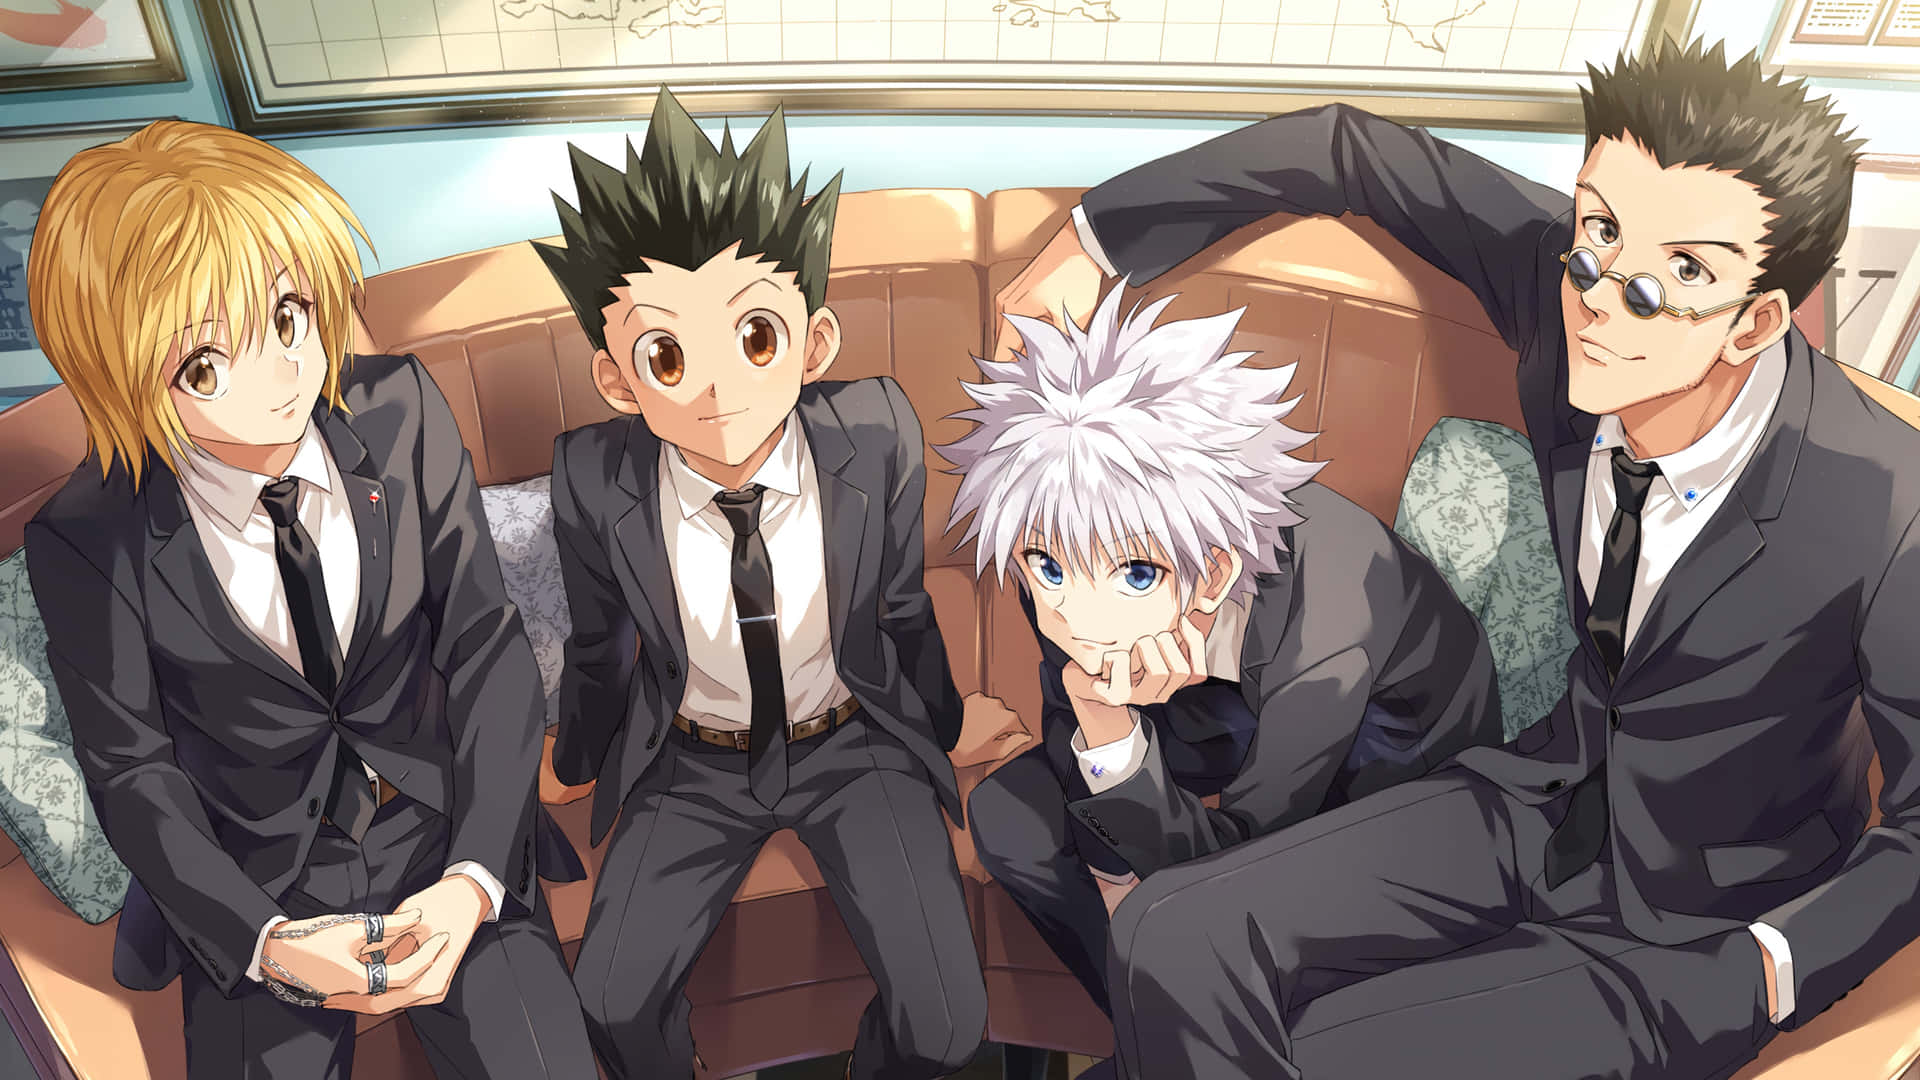 Gear up for your gaming with the all-new Hunter X Hunter Laptop Wallpaper